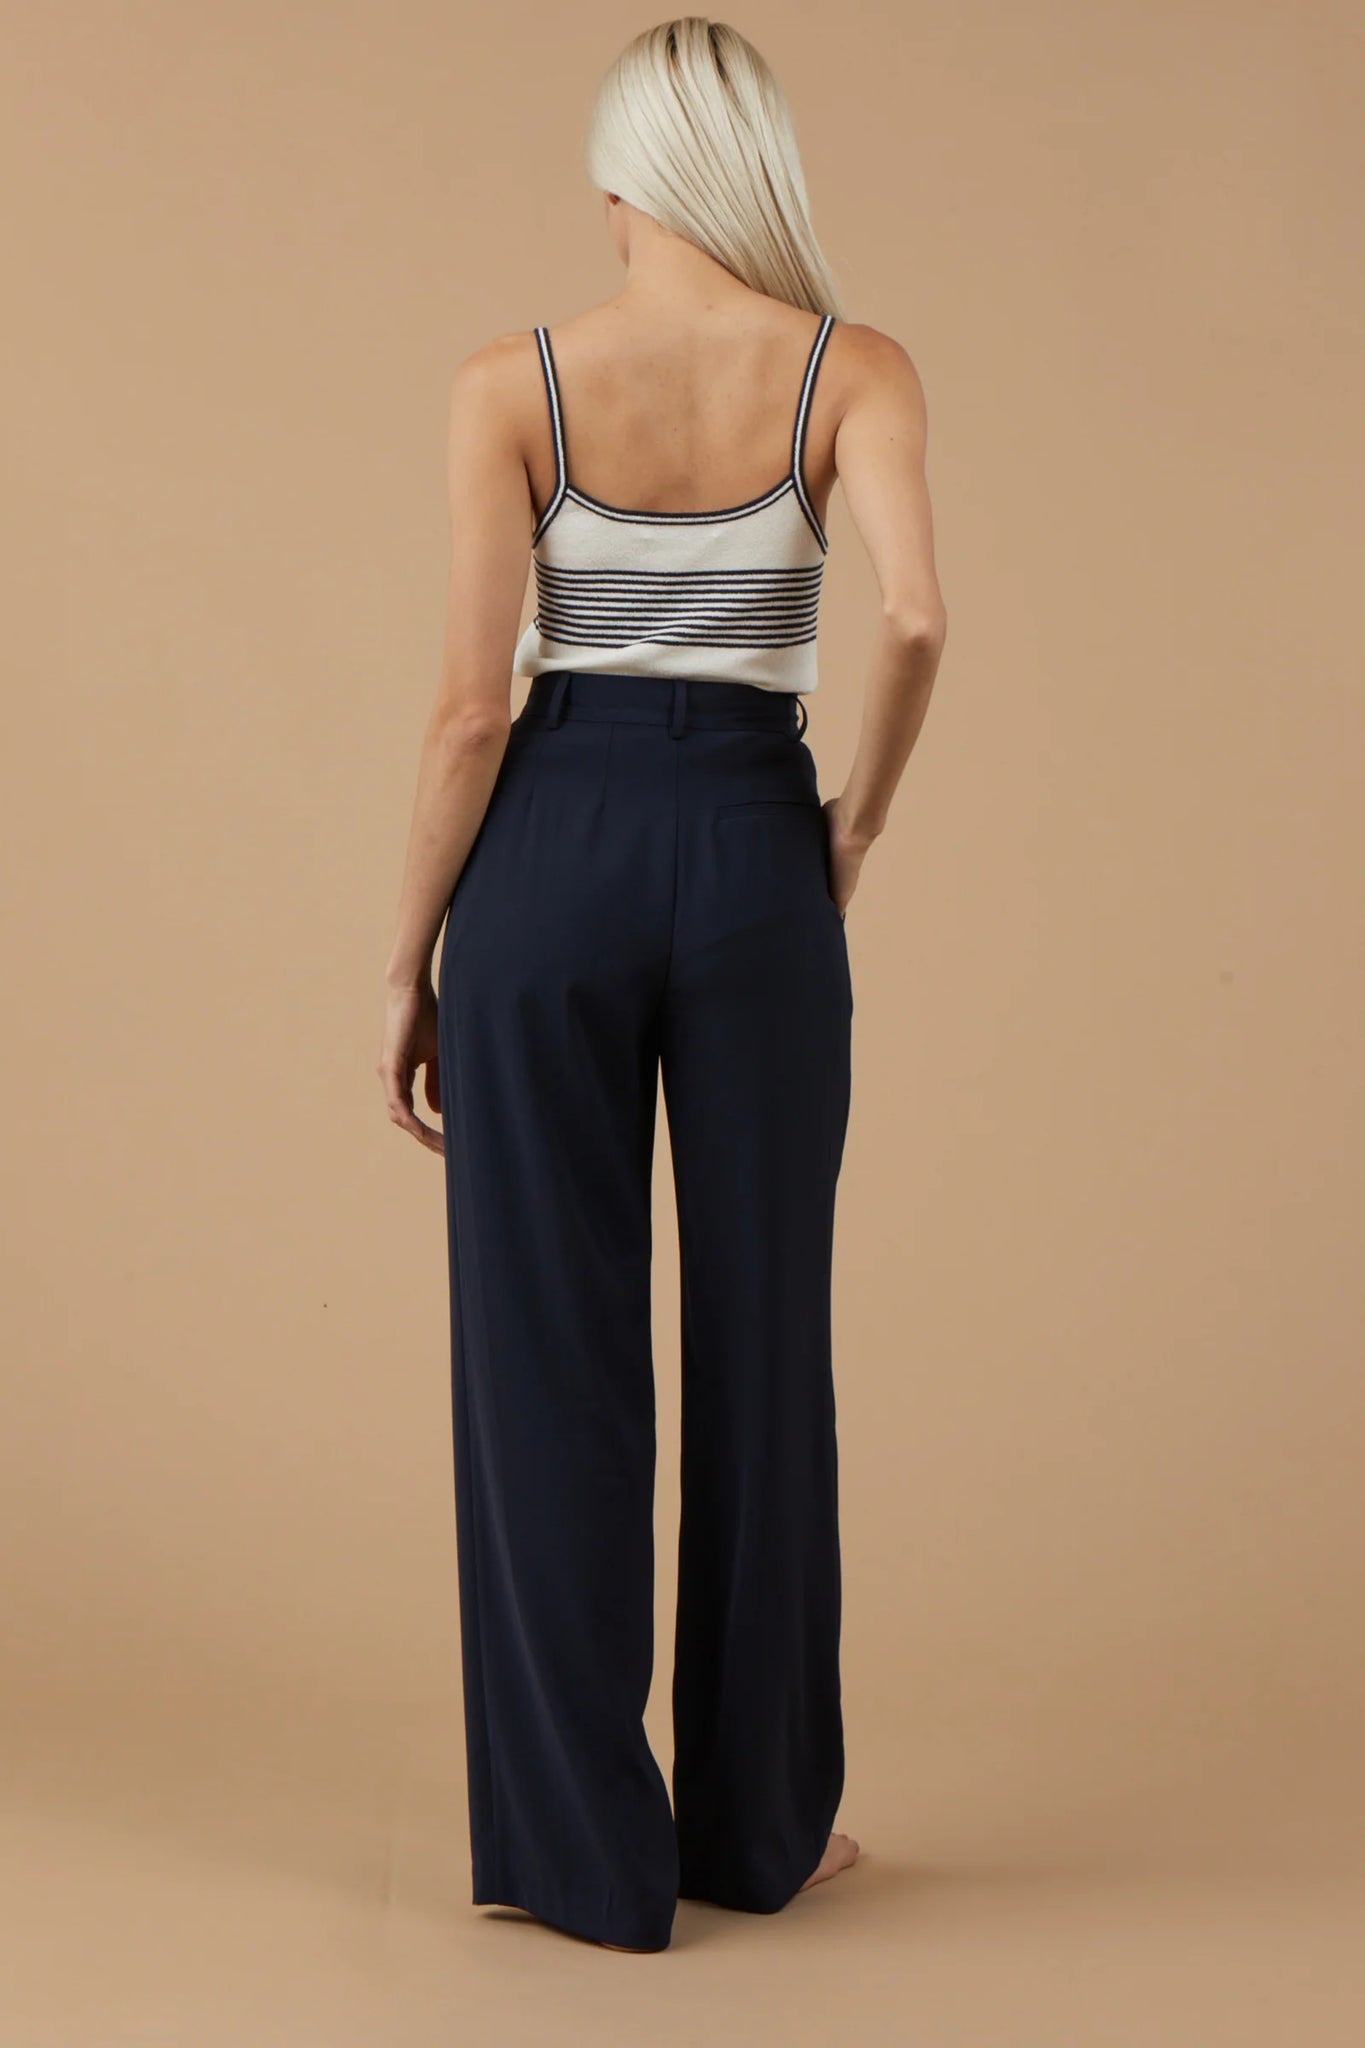 Pleated Dress Pants for Tall Women | American Tall